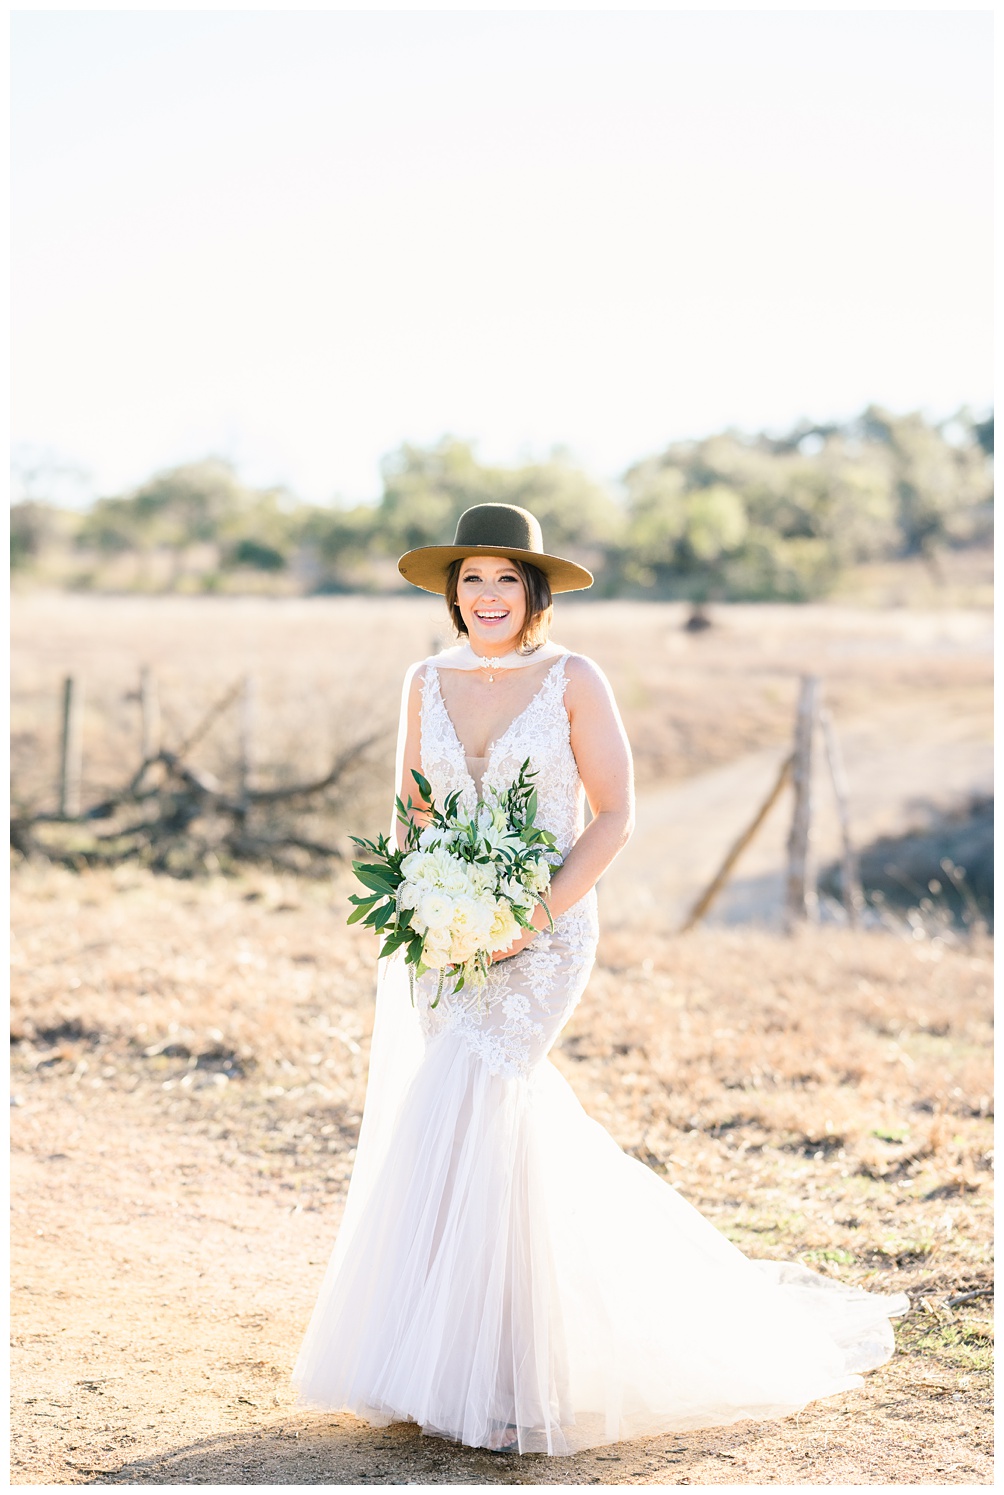 Bridal Portraits at Pecan Springs Ranch; Bride holds white and green wedding bouquet while wearing a bridal cape and a green felt hat